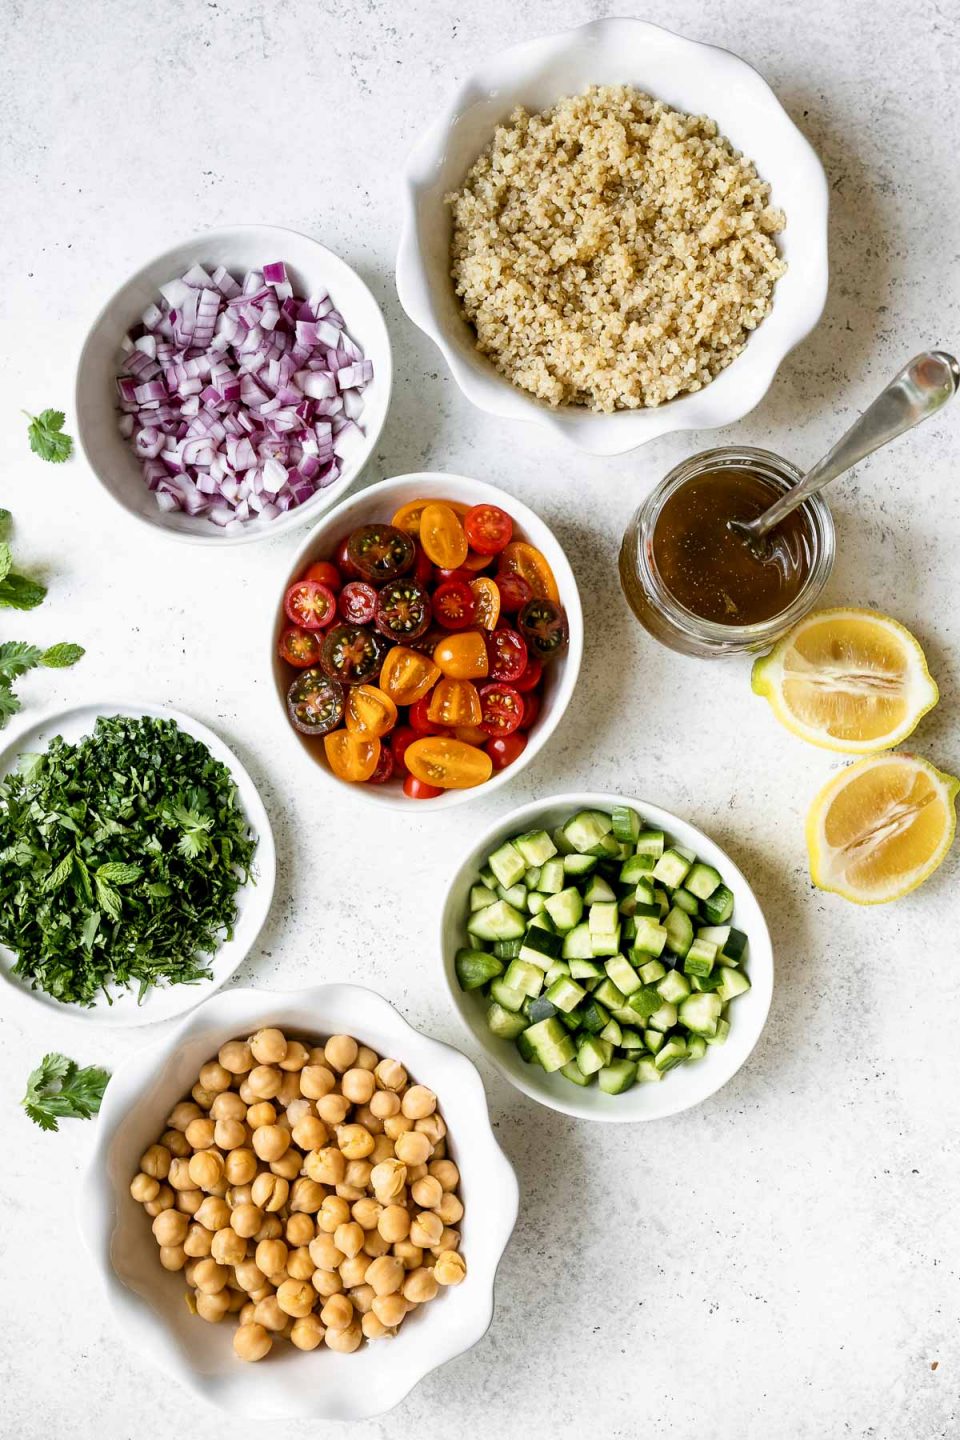 Quinoa salad ingredients in individual small bowls, arranged on a white surface - red onion, quinoa, tomatoes, salad dressing, lemon, cucumber, chickpeas & fresh herbs.